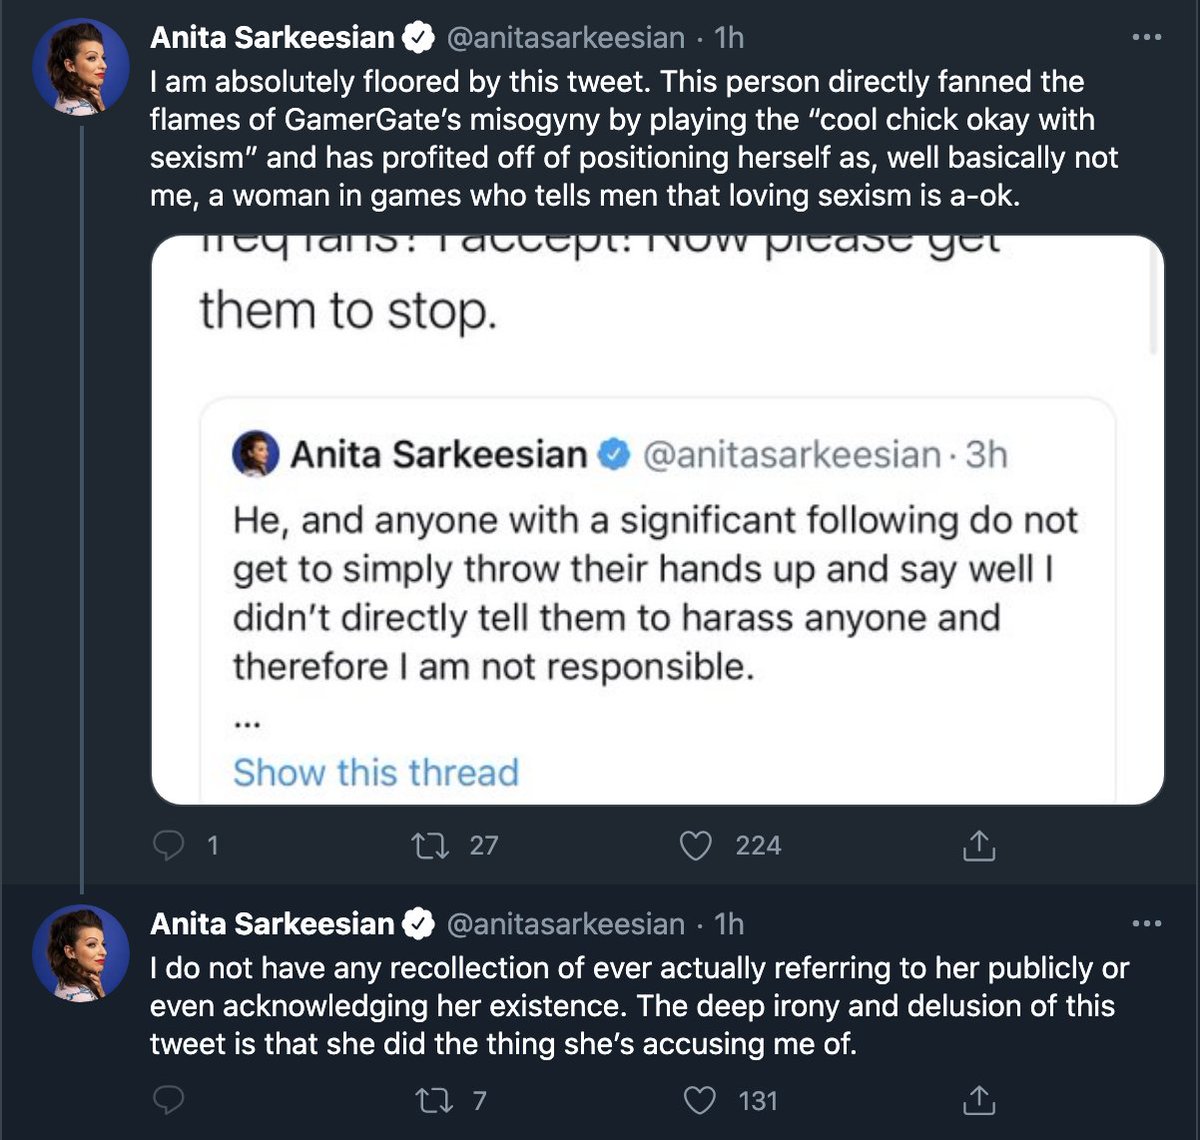 "...anyone with a significant following do not get to simply throw their hands up and say well I didn’t directly tell them to harass anyone and therefore I am not responsible...teehee, just kidding. Rules for thee but not for mee"